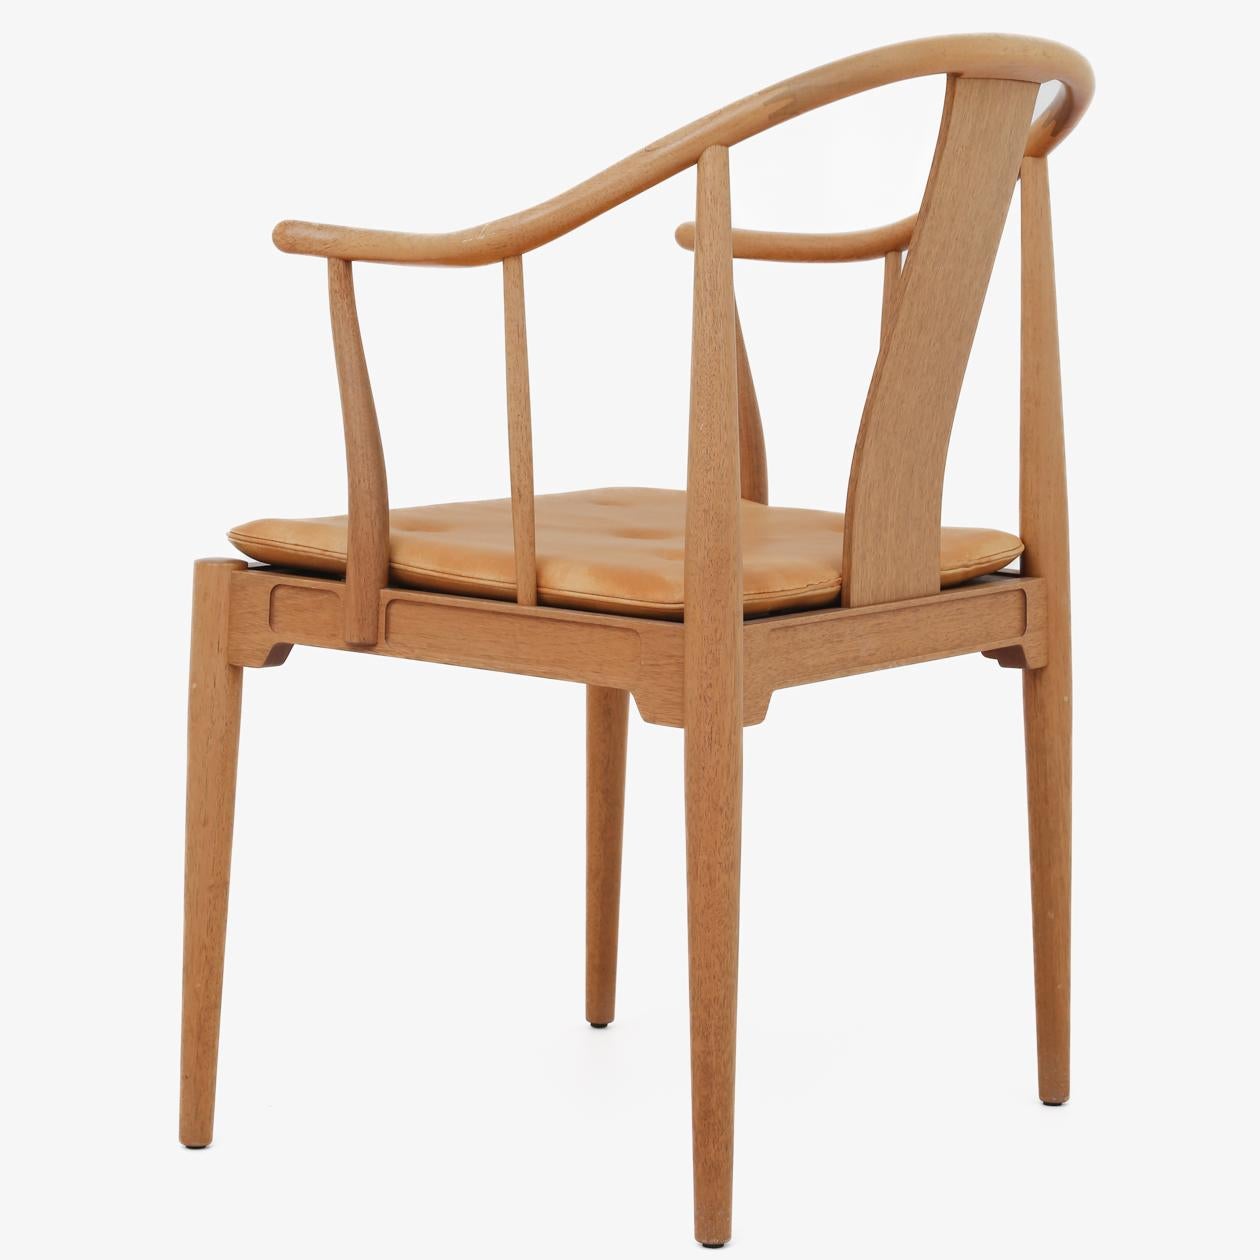 FH 4283 - China chair in mahogany with cushion in patinated natural leather. Hans J. Wegner / Fritz Hansen.